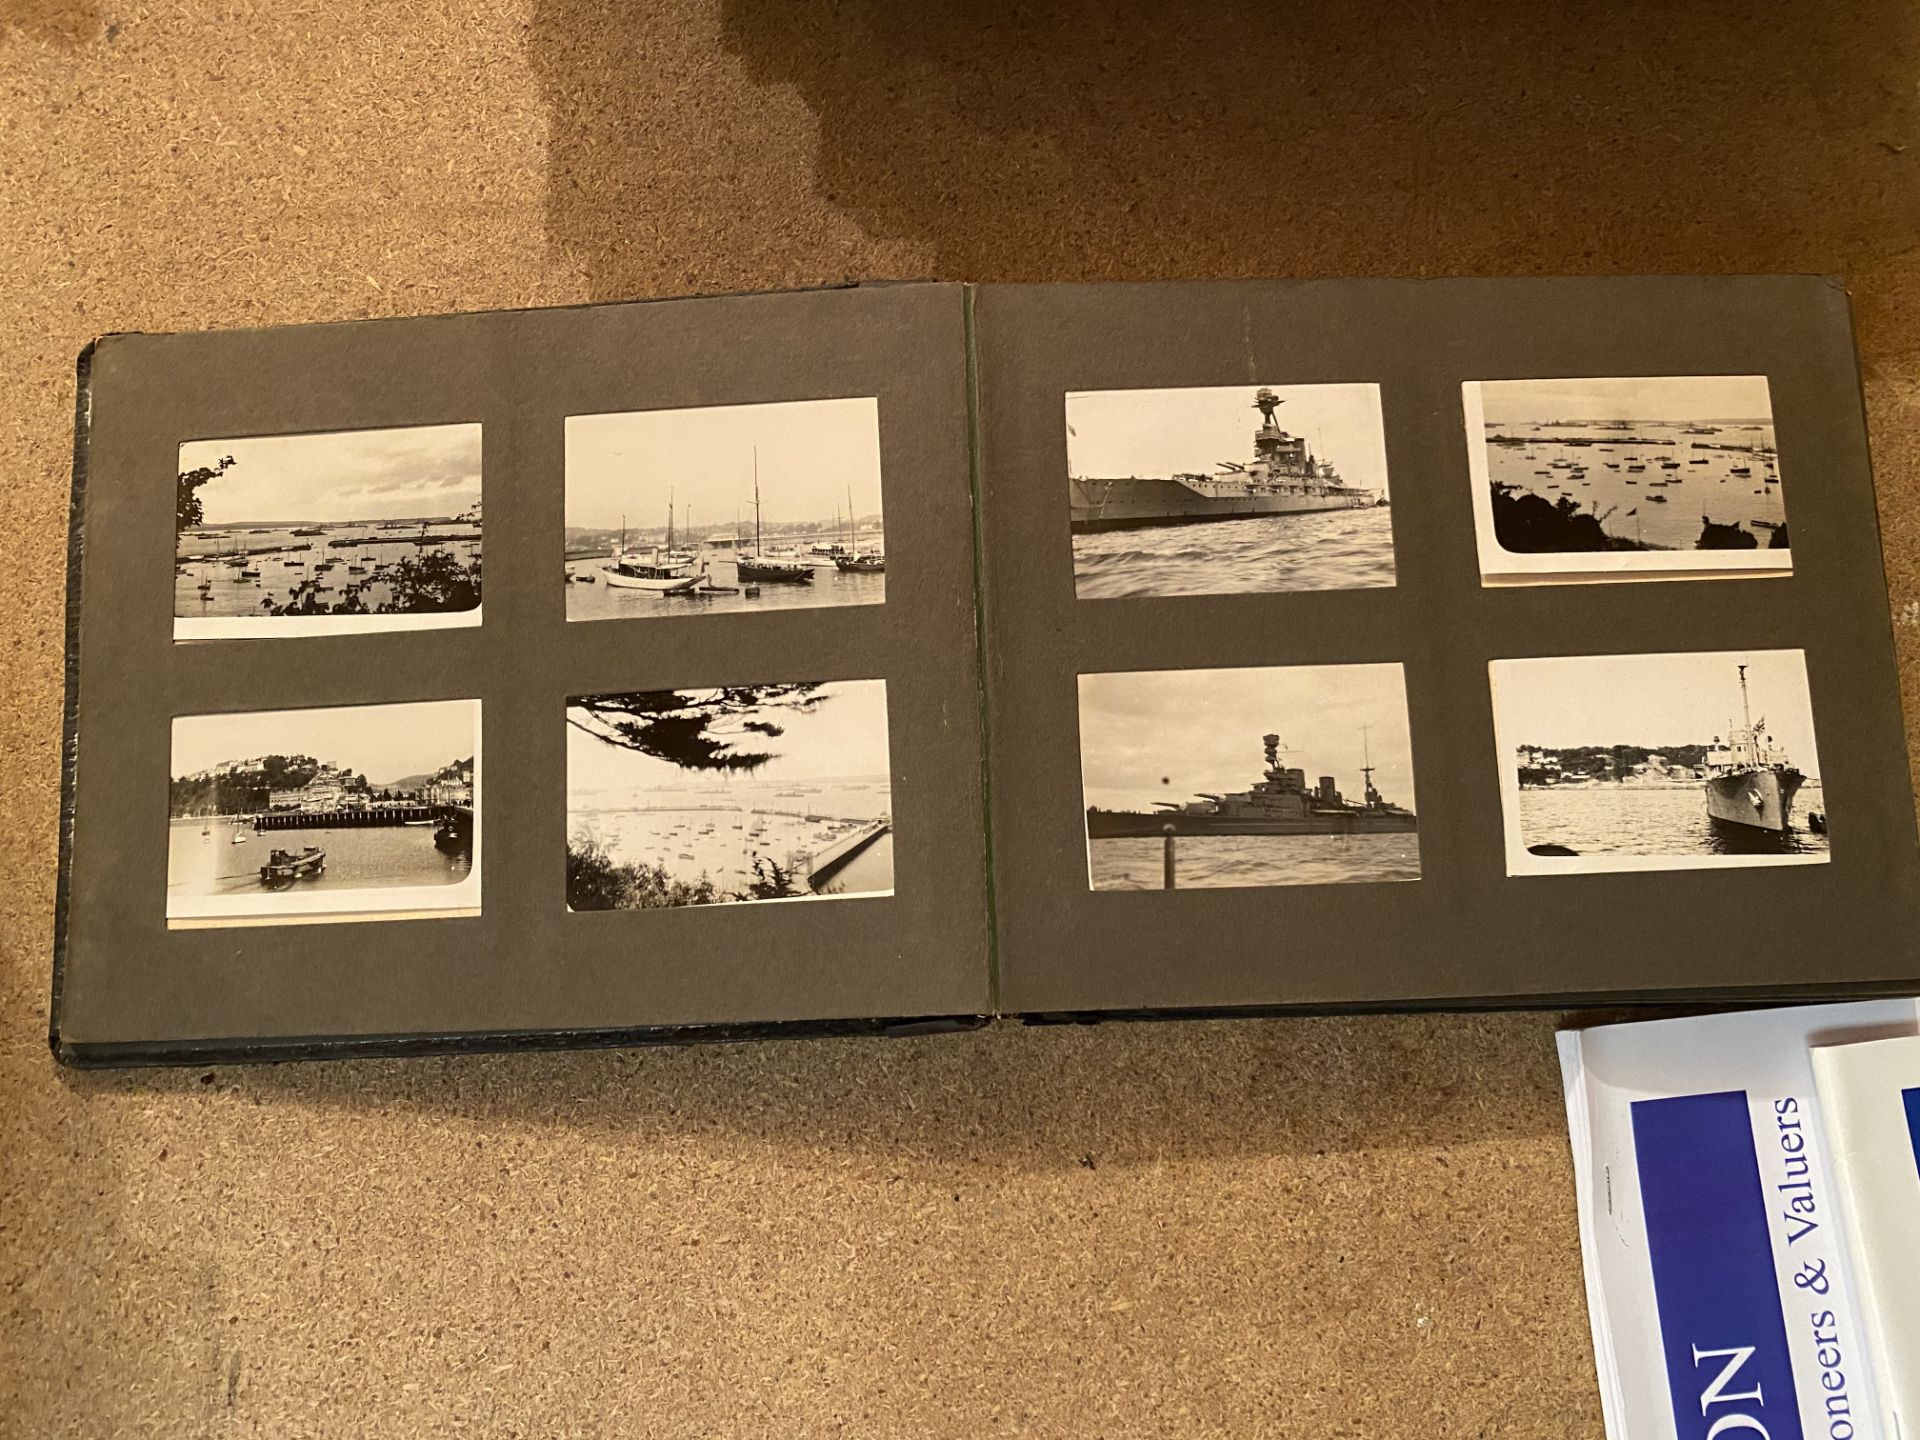 A SMALL VINTAGE PHOTO ALBUM CONTAINING BLACK AND WHITE IMAGES - Image 3 of 8